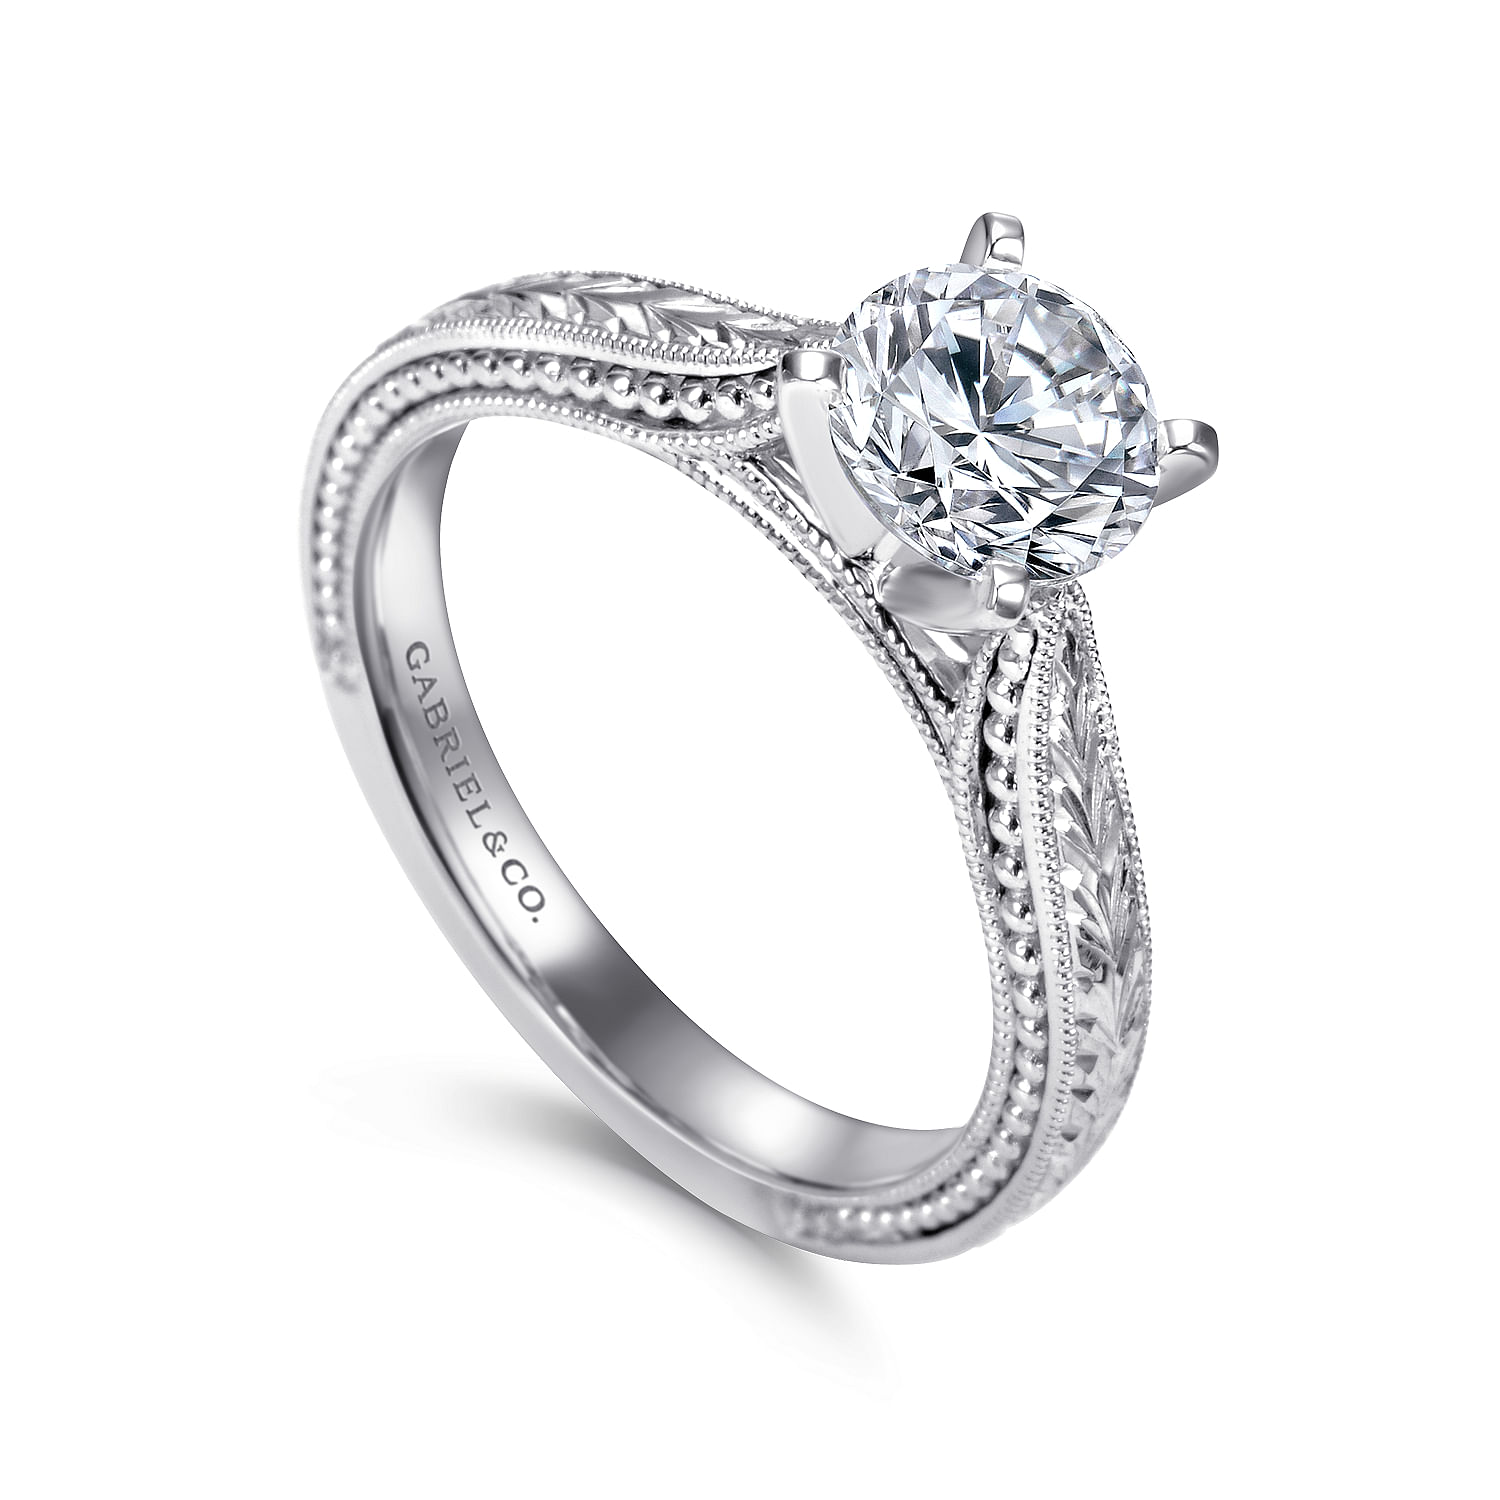 Maura - Vintage Inspired 14K White Gold Round Solitaire Engagement Ring - Shot 3